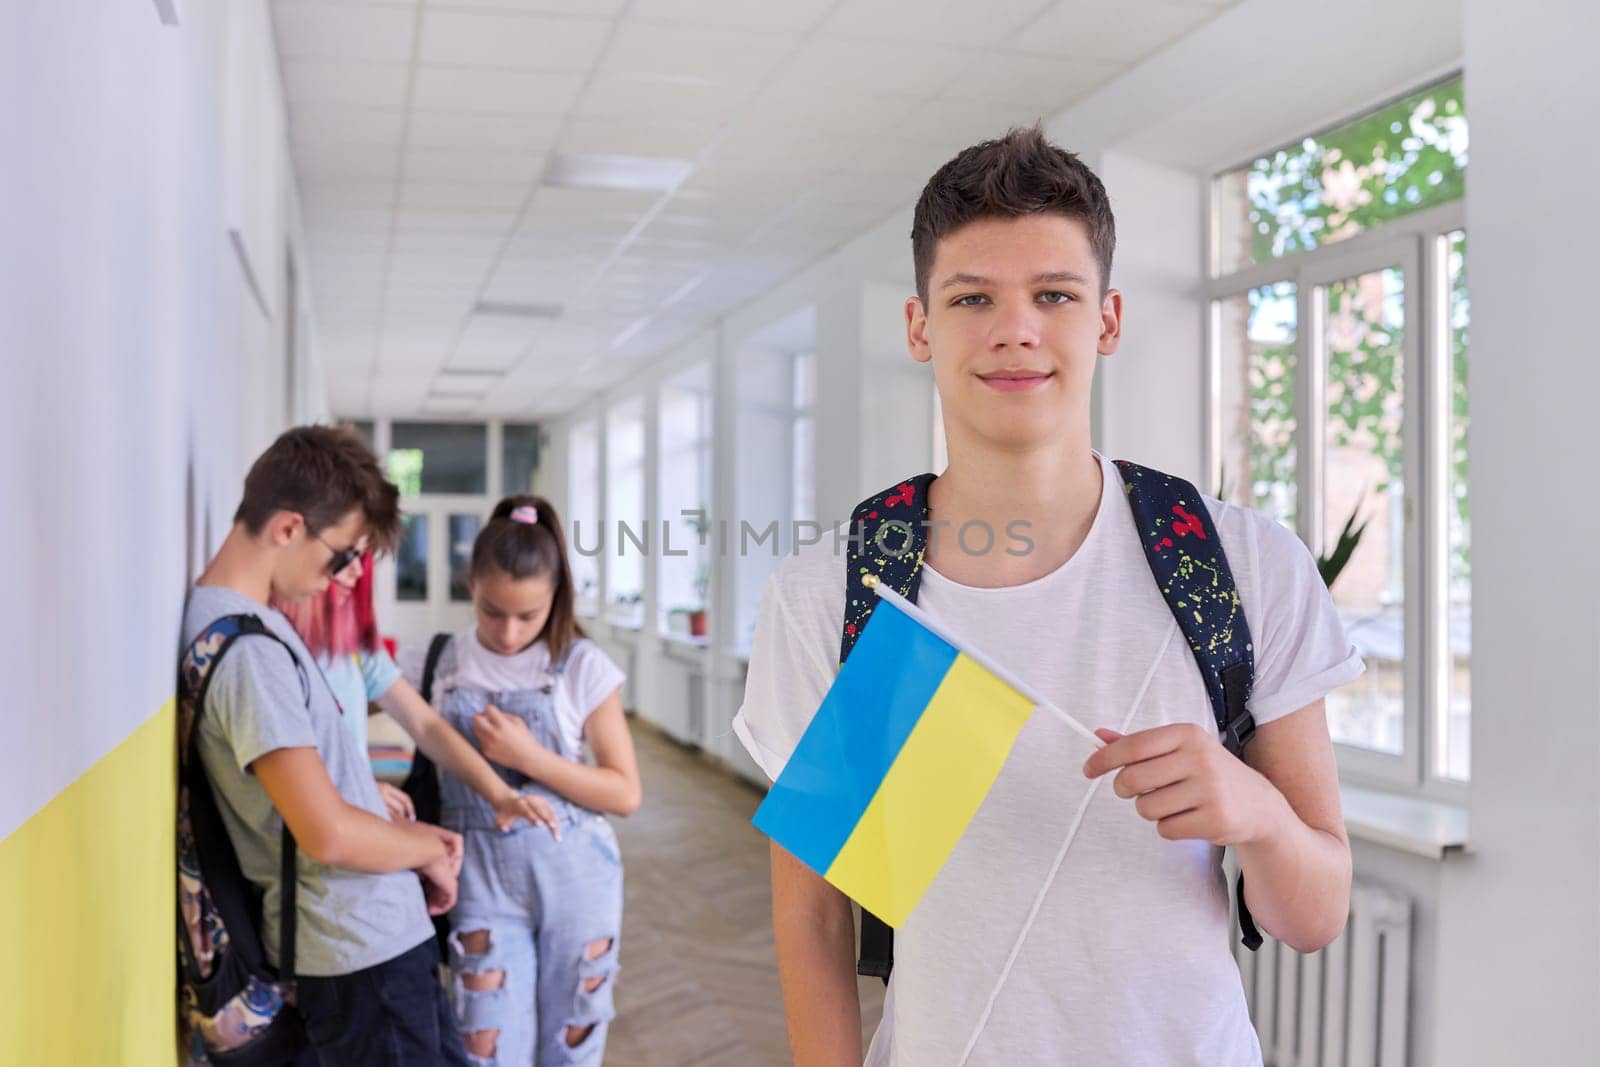 Teenager student with Ukraine flag, school corridor group of students background by VH-studio